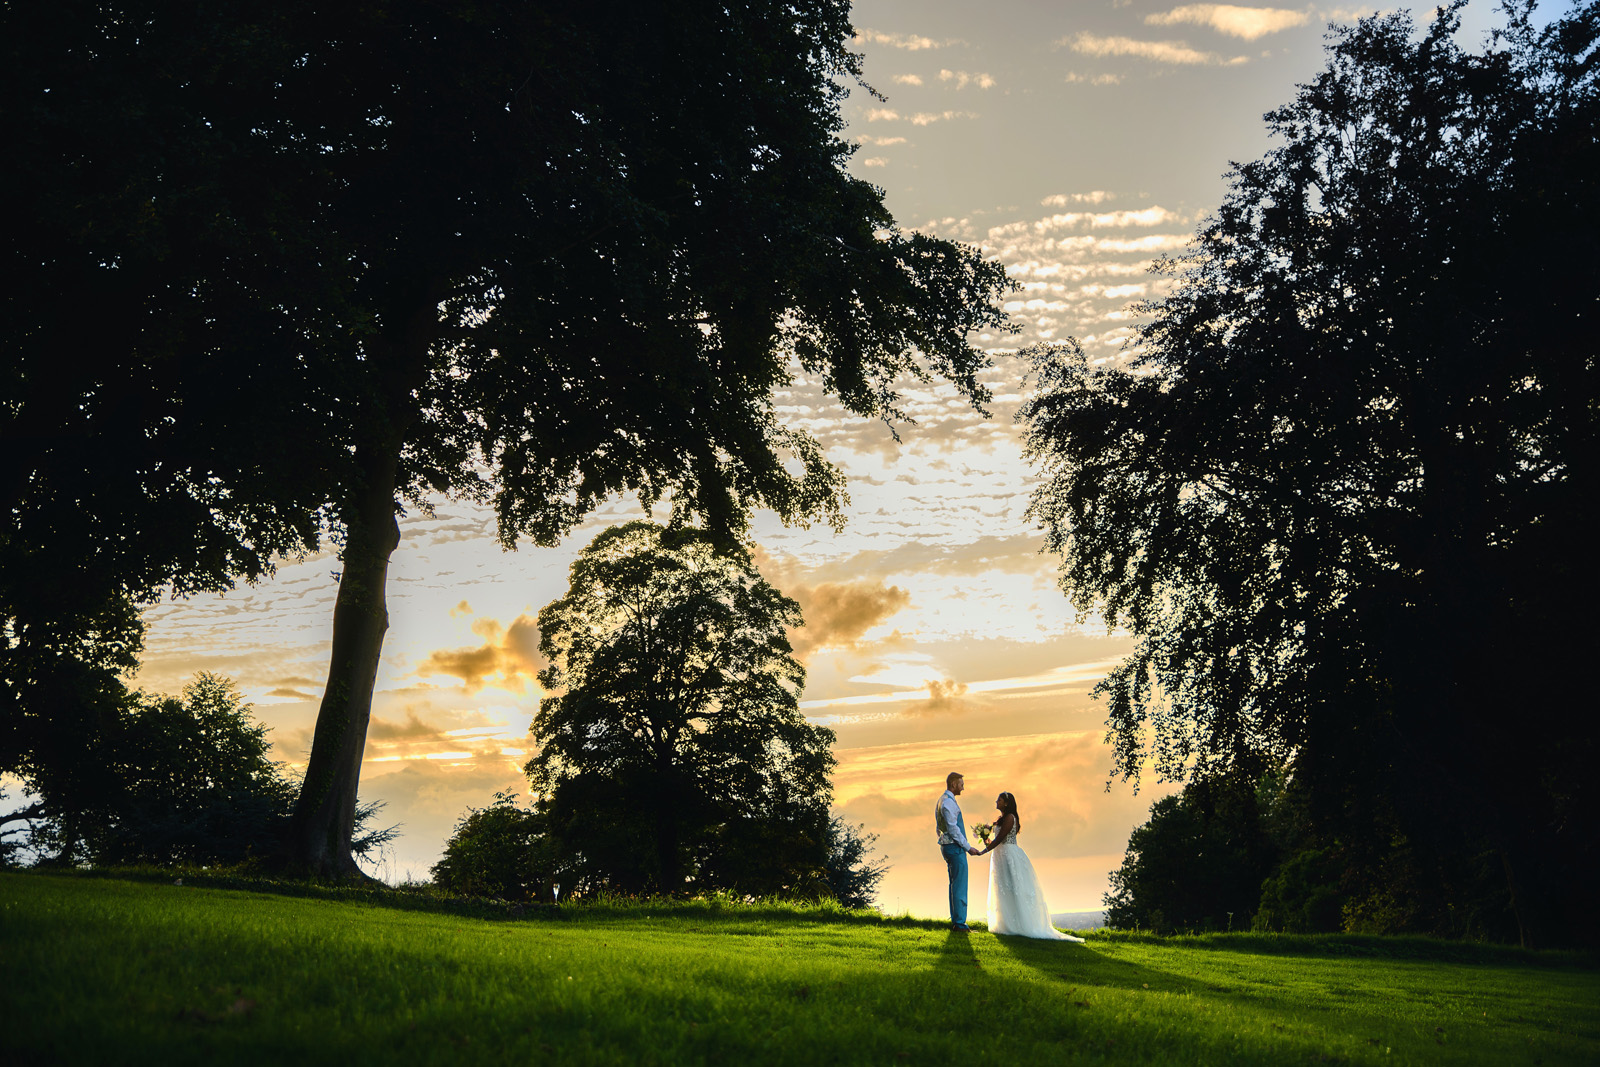 Sunset Bride and Groom wedding photography at Coombe Lodge